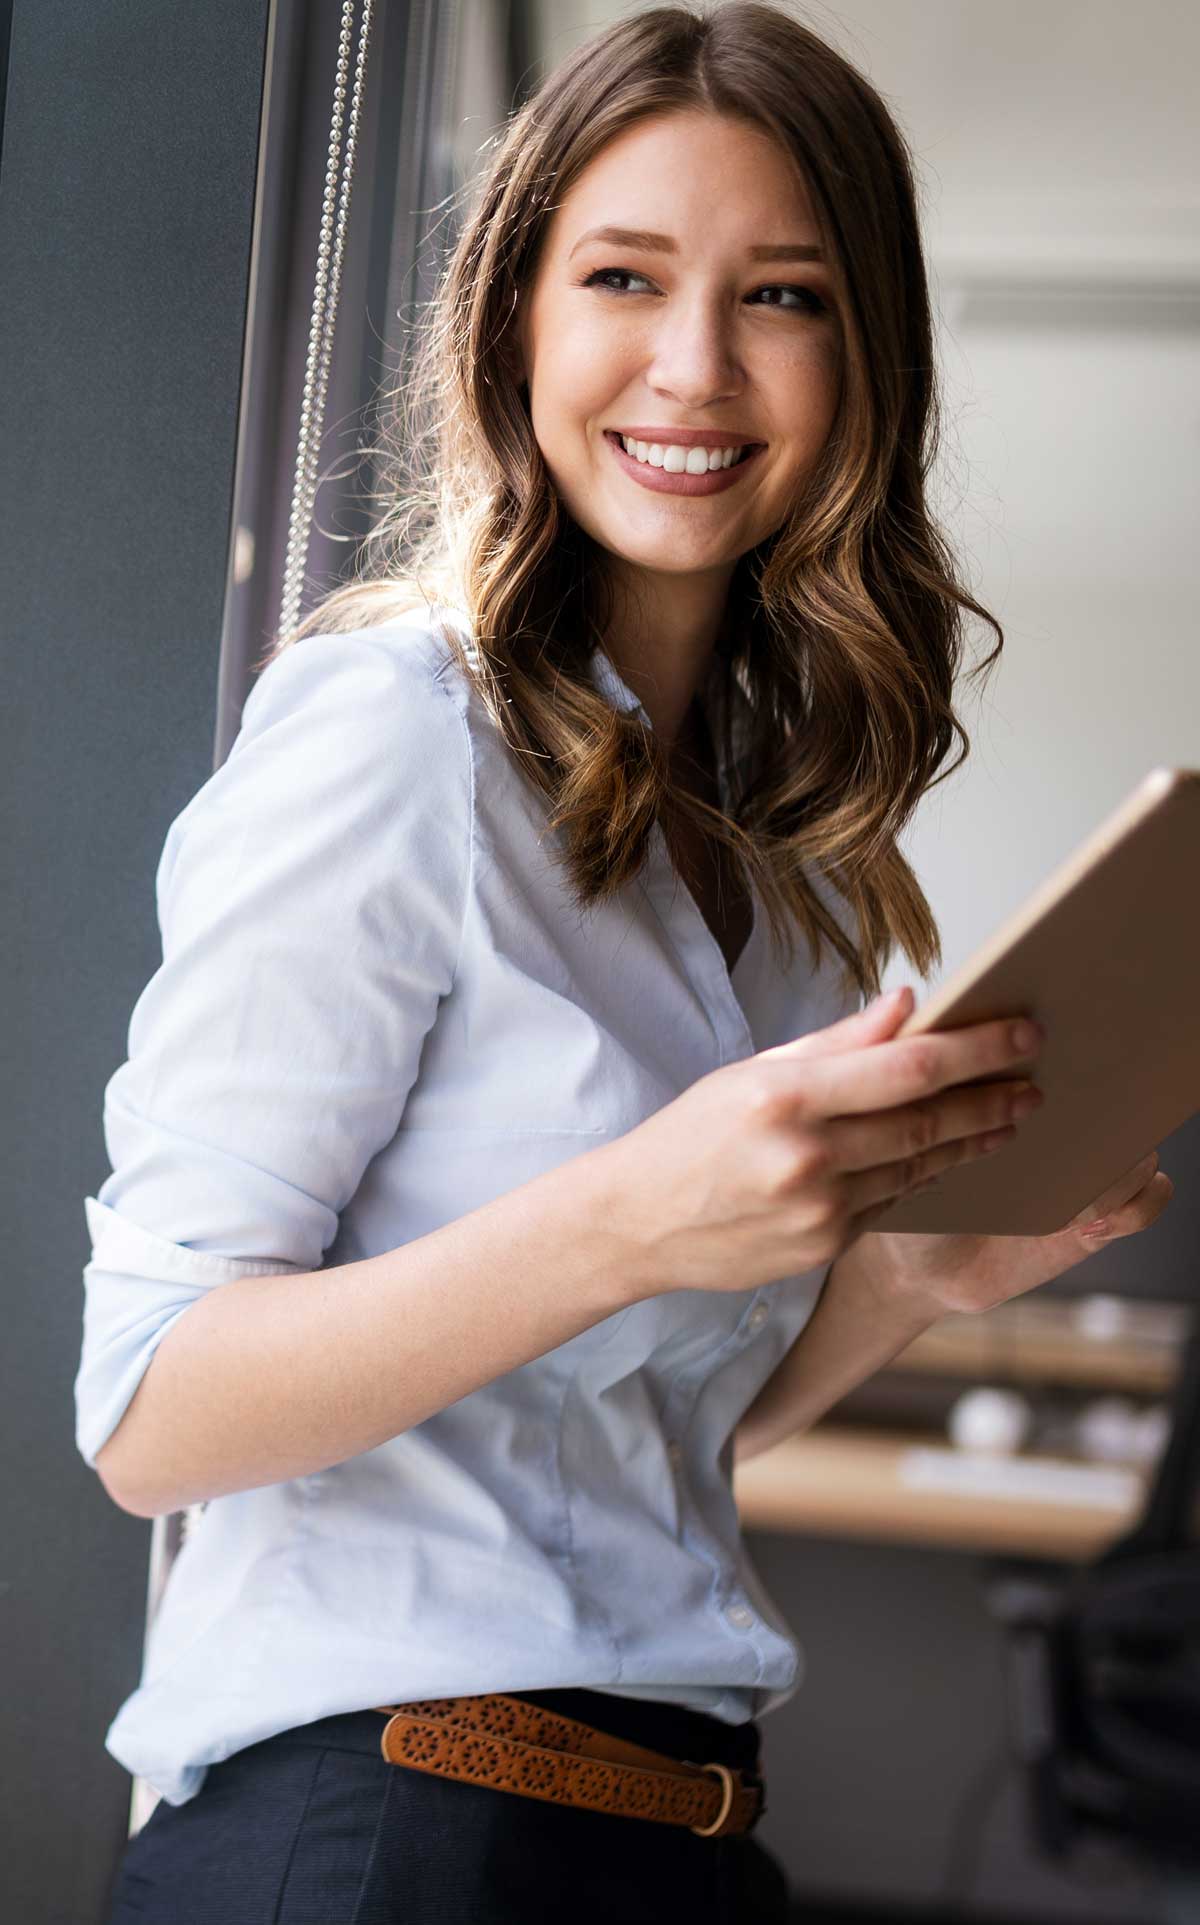 Smiling woman with notepad